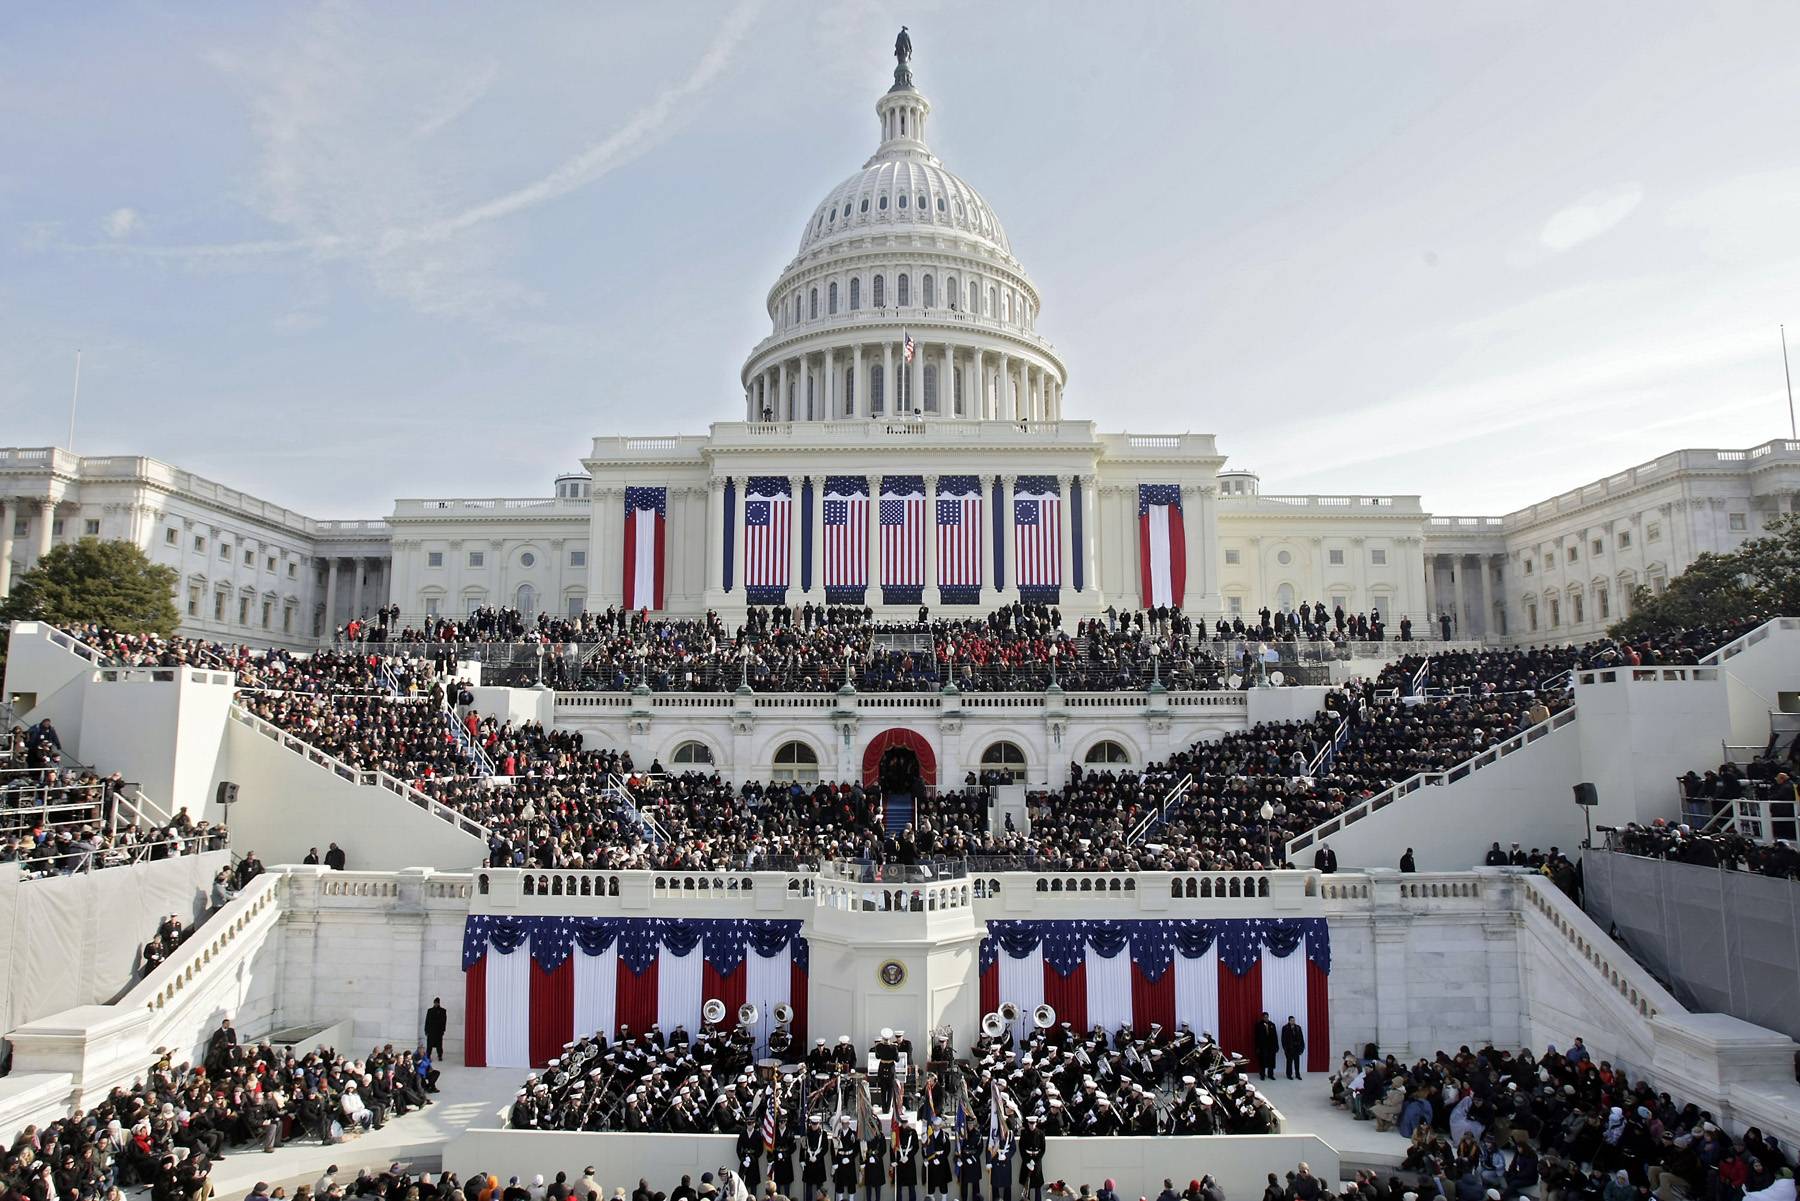 Getting Tickets for the 2013 inauguration ceremony